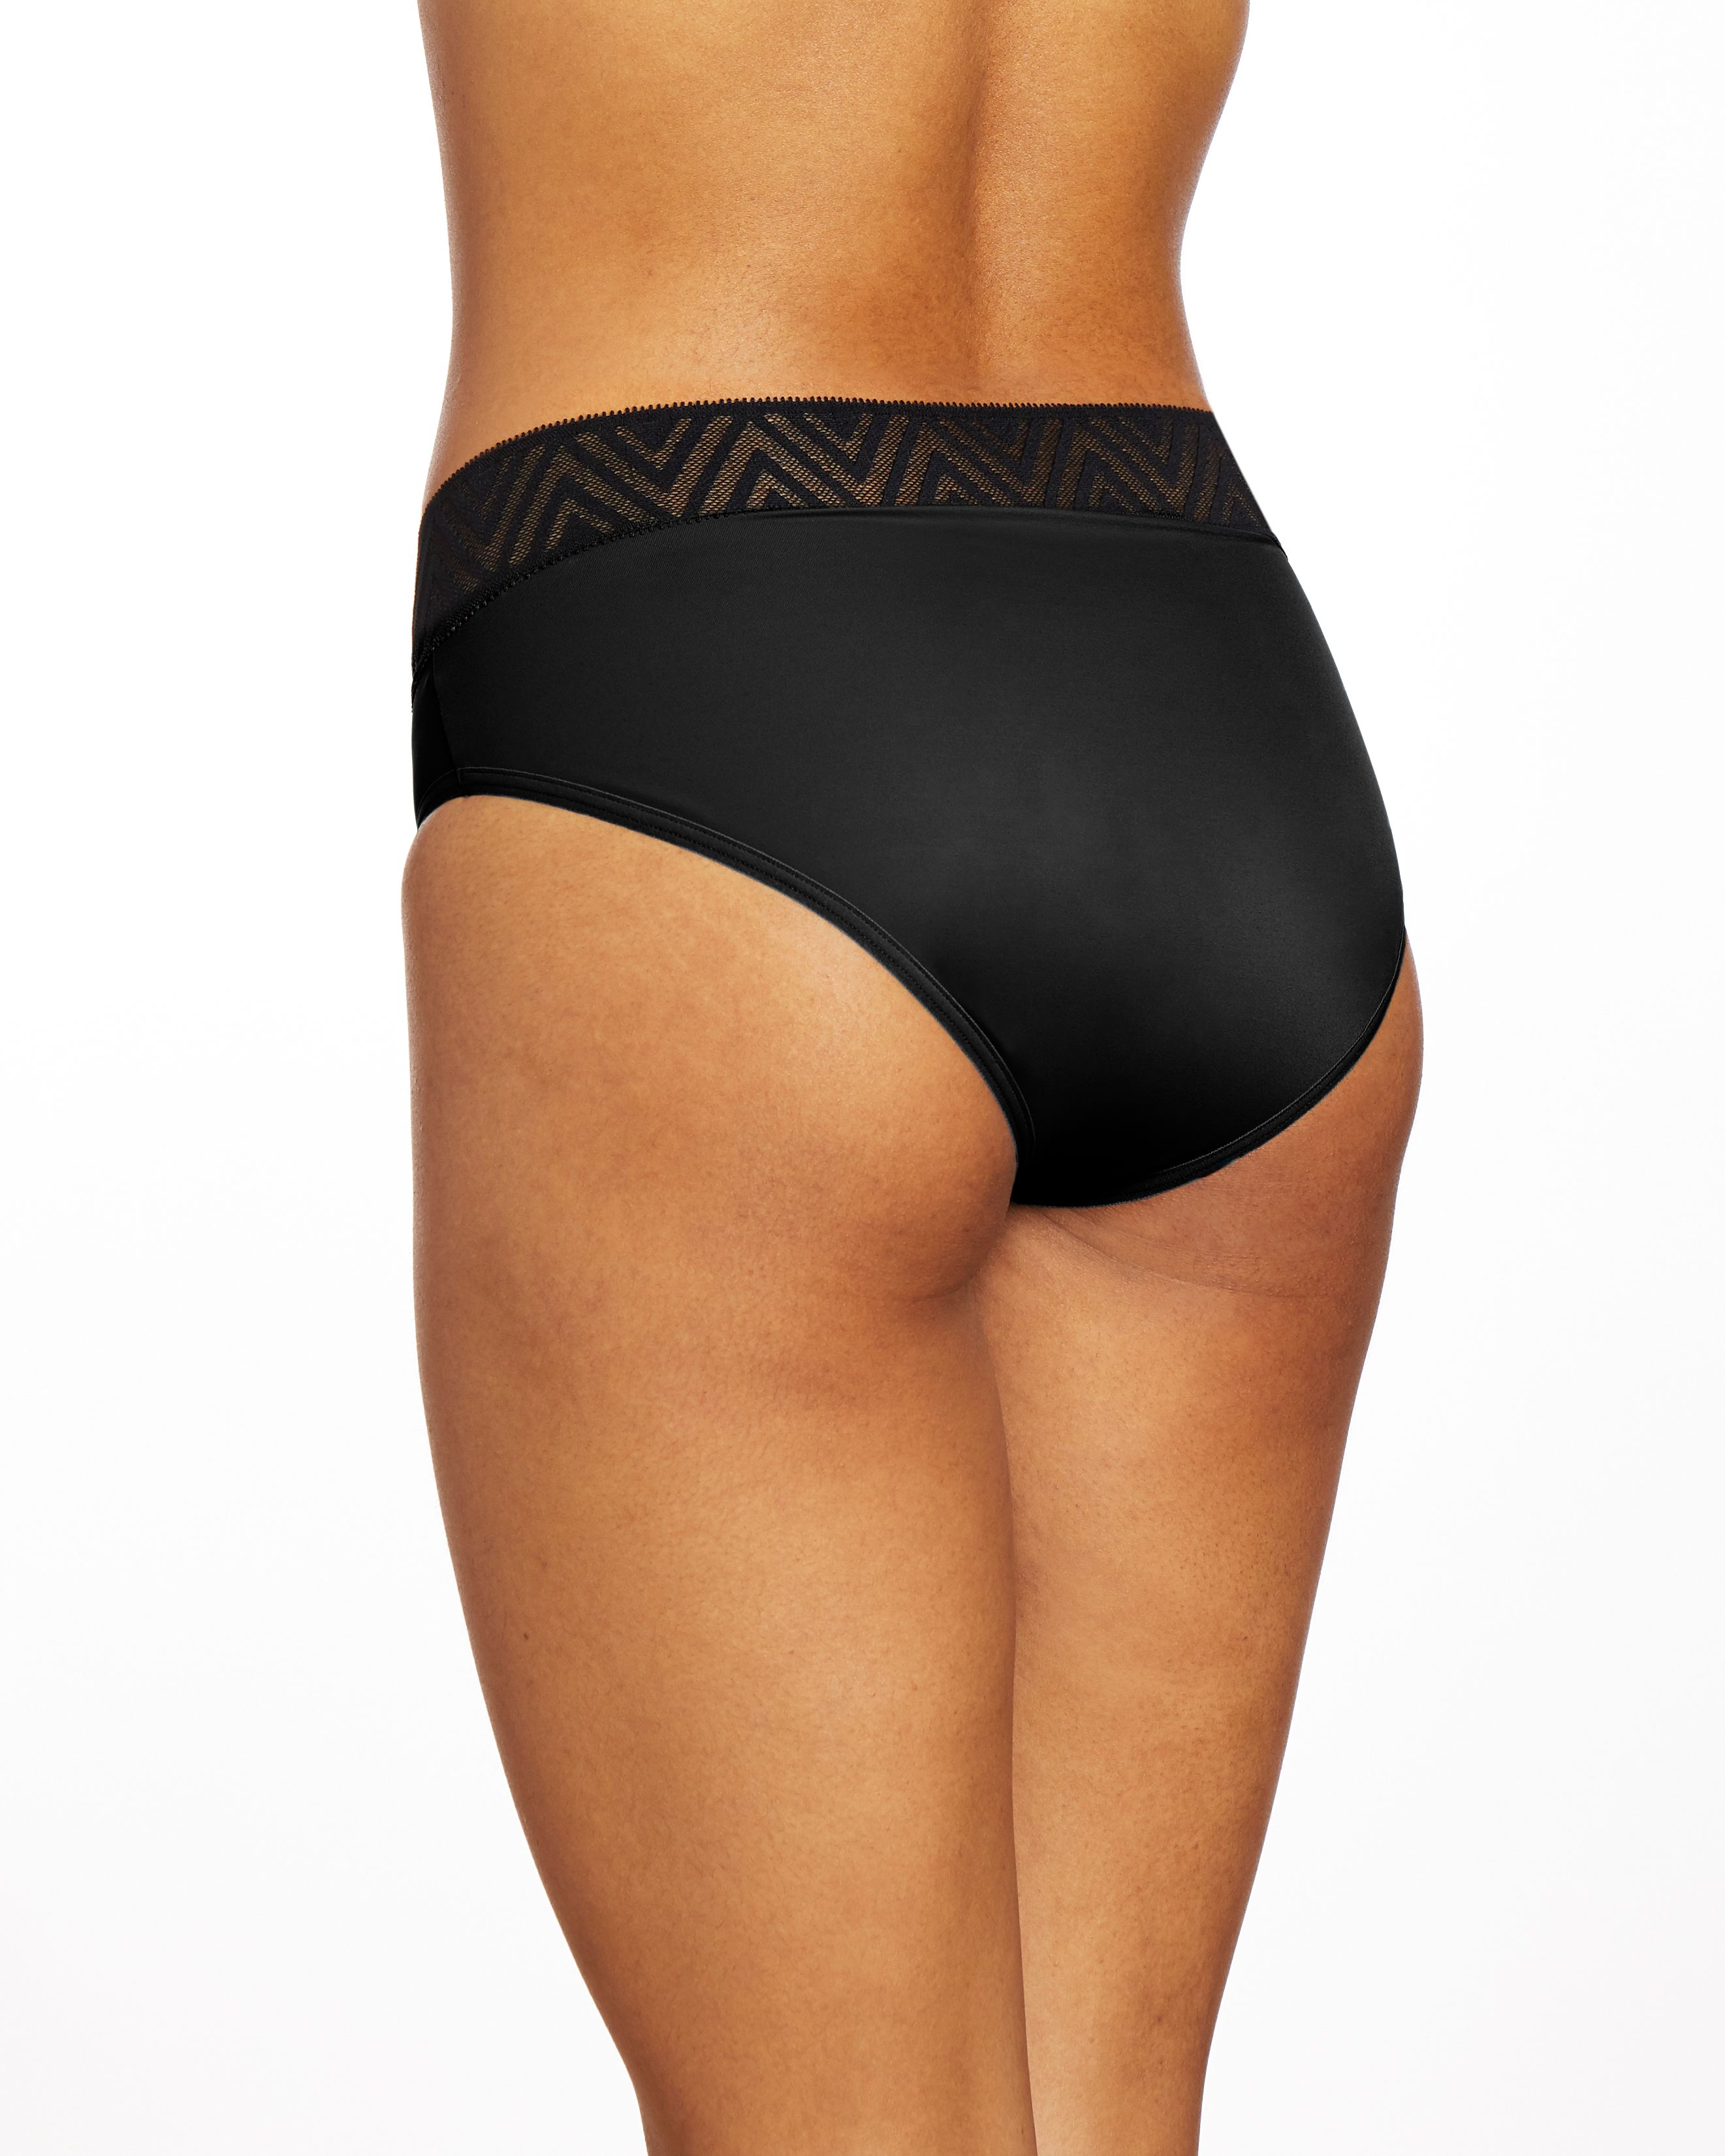 DISCThinx Period Proof Hiphugger Black - XL (New Geo Lace)